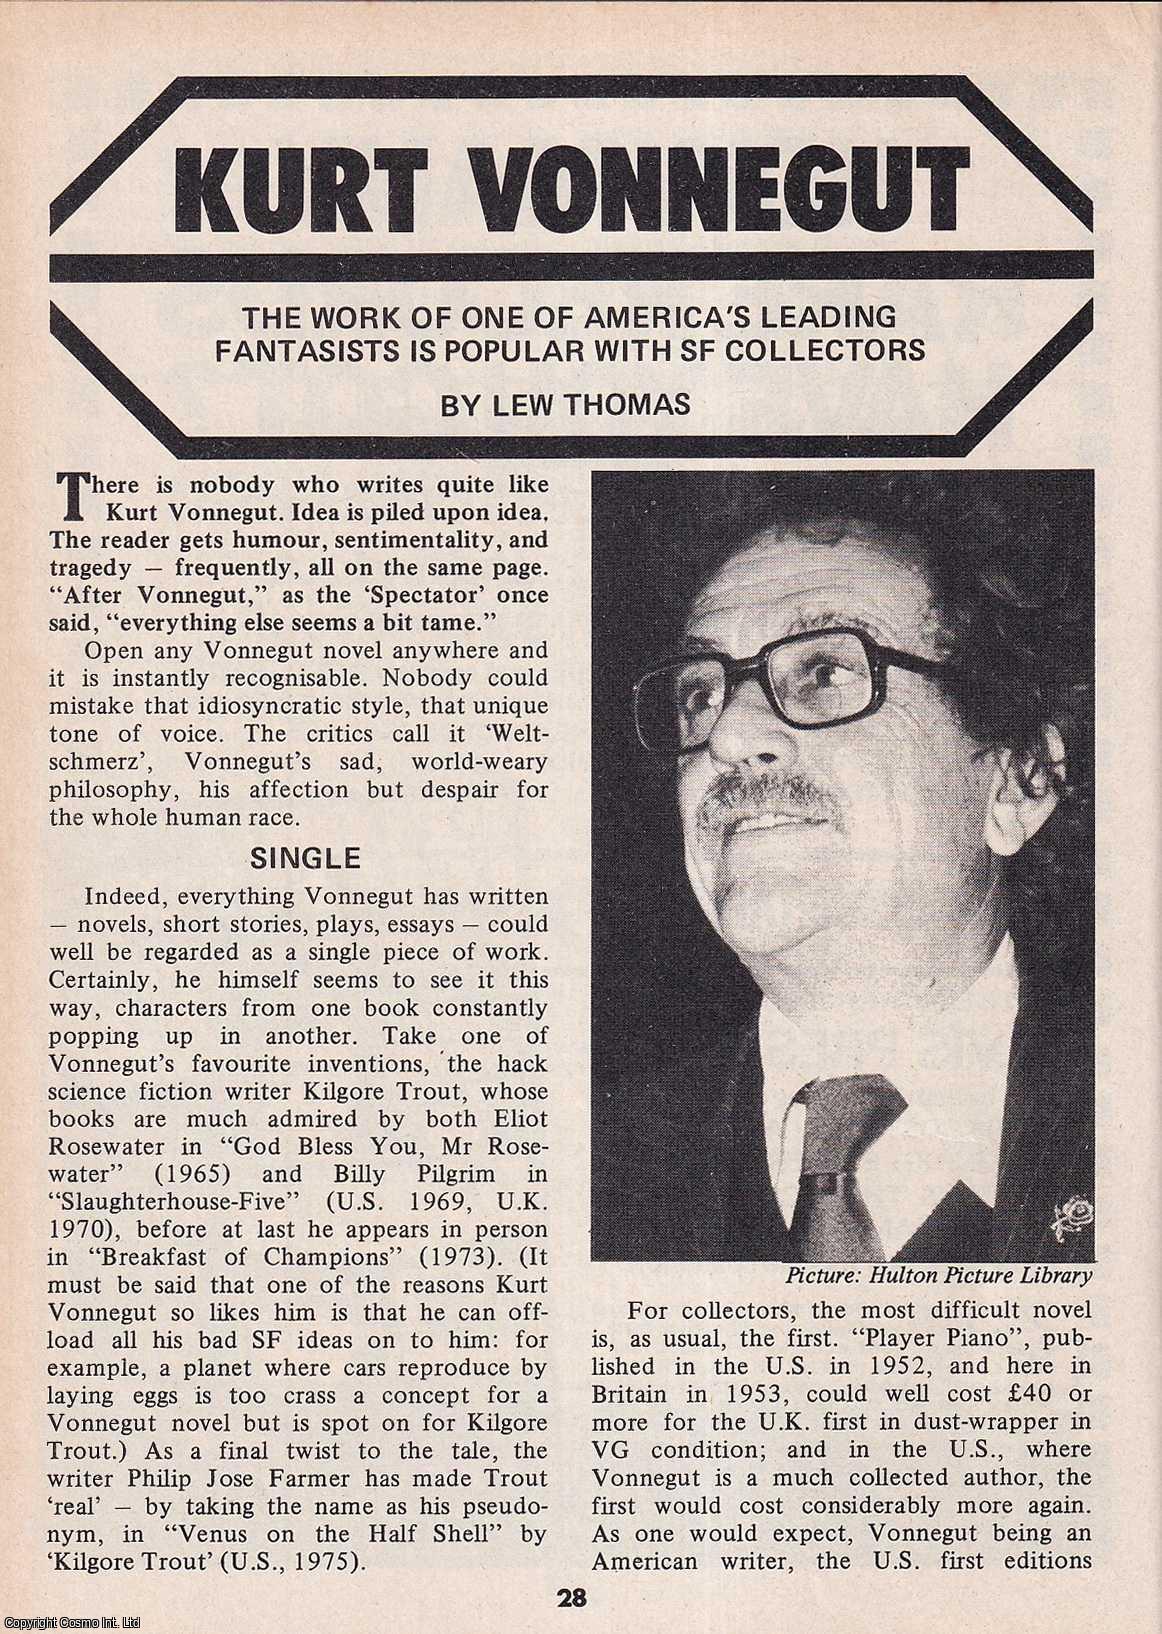 Lew Thomas - Kurt Vonnegut. One of America's Leading Fantasists is Popular with SF Collectors. This is an original article separated from an issue of The Book & Magazine Collector publication.